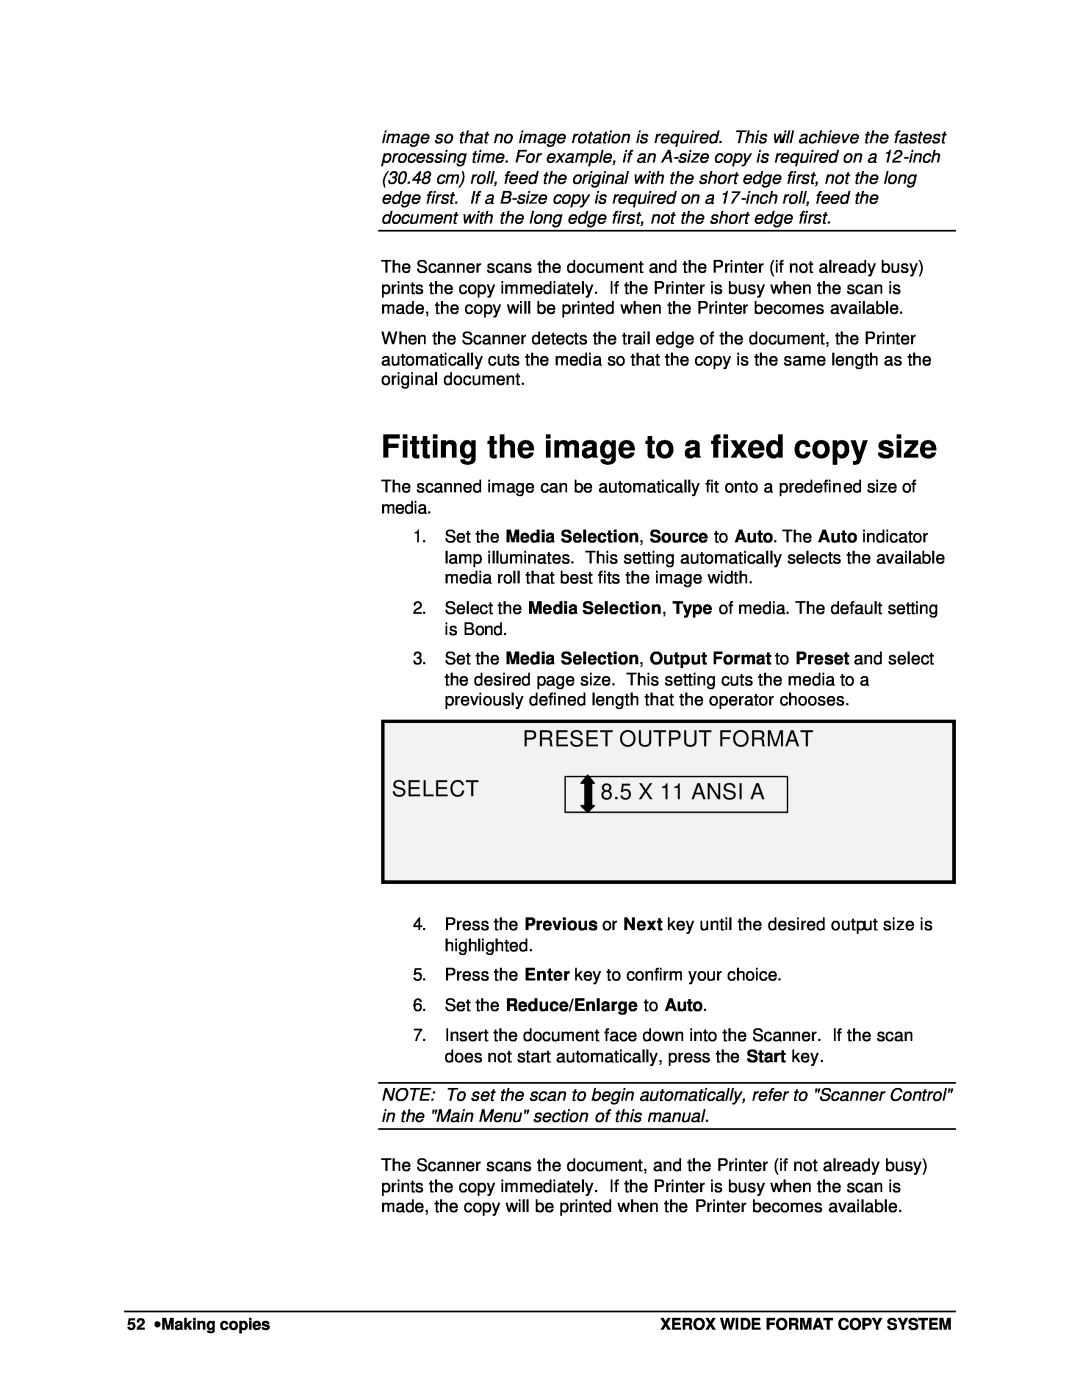 Xerox 8830, 8825, 8850, X2 manual Fitting the image to a fixed copy size, Preset Output Format, Select, 8.5 X 11 ANSI A 